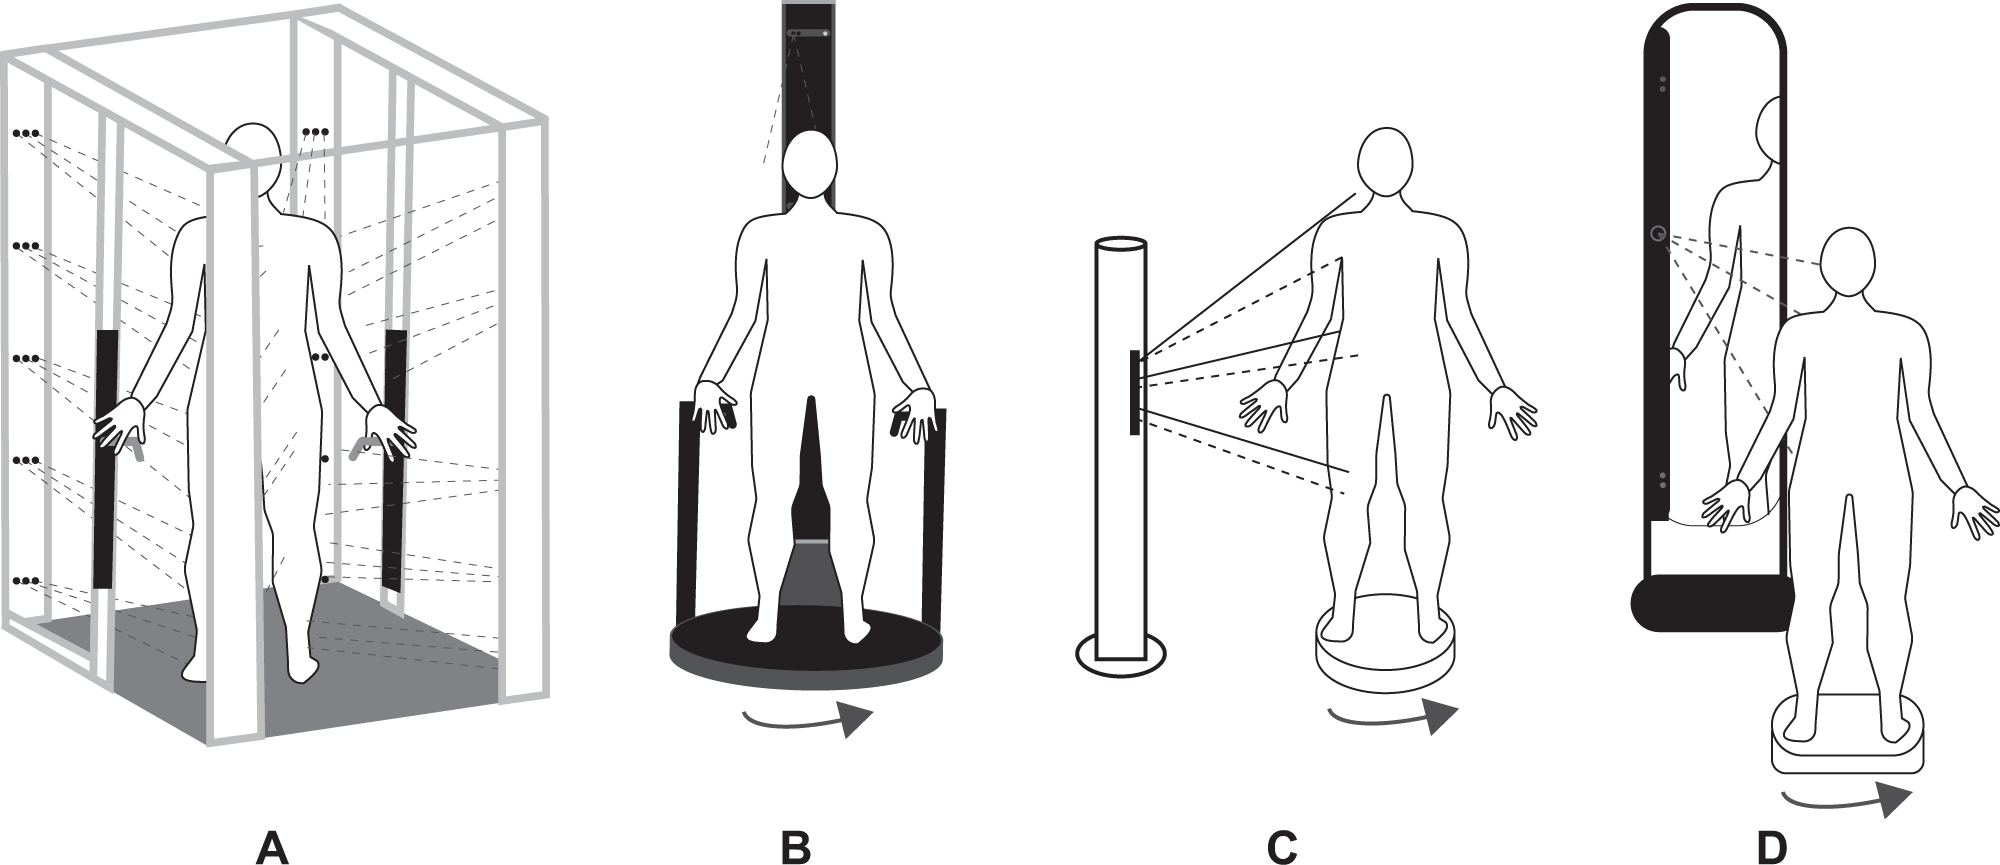 Digital anthropometry via three-dimensional optical scanning: evaluation of  four commercially available systems | European Journal of Clinical Nutrition